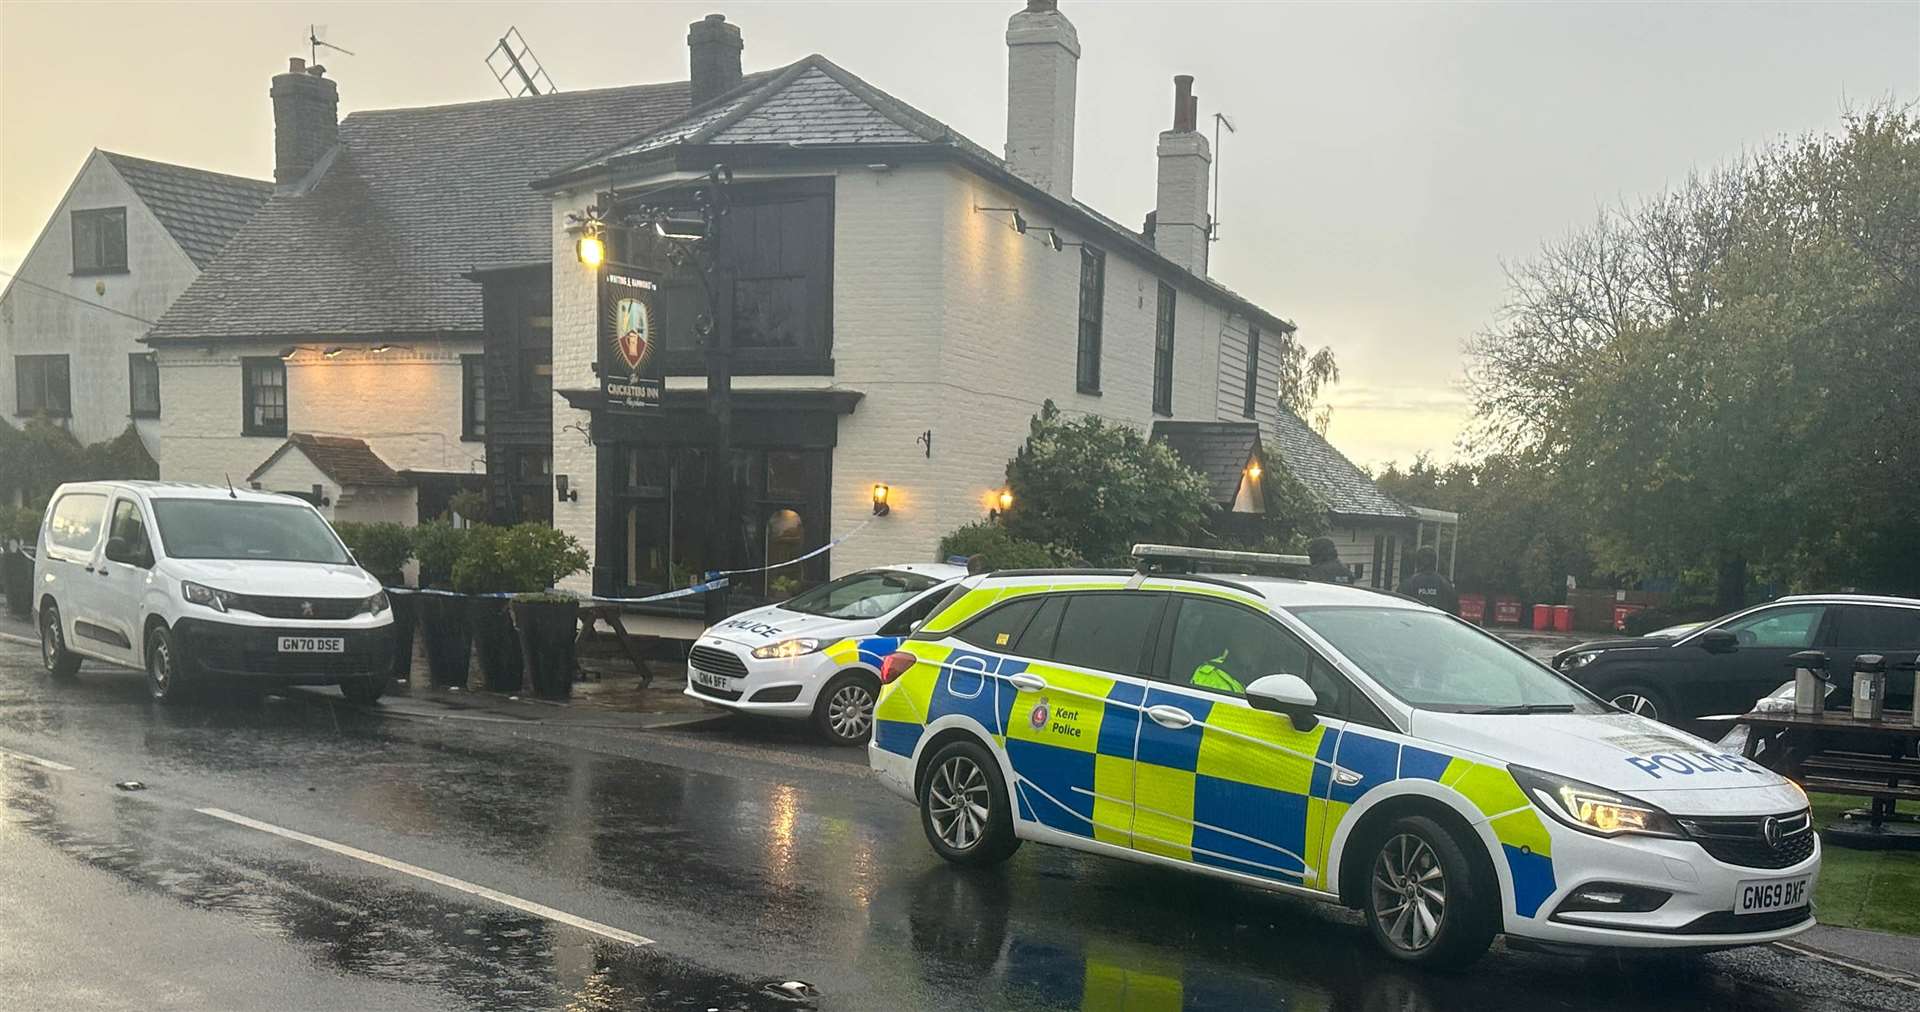 Police were called to The Cricketers Inn, Wrotham Road, Meopham, after reports a man was assaulted